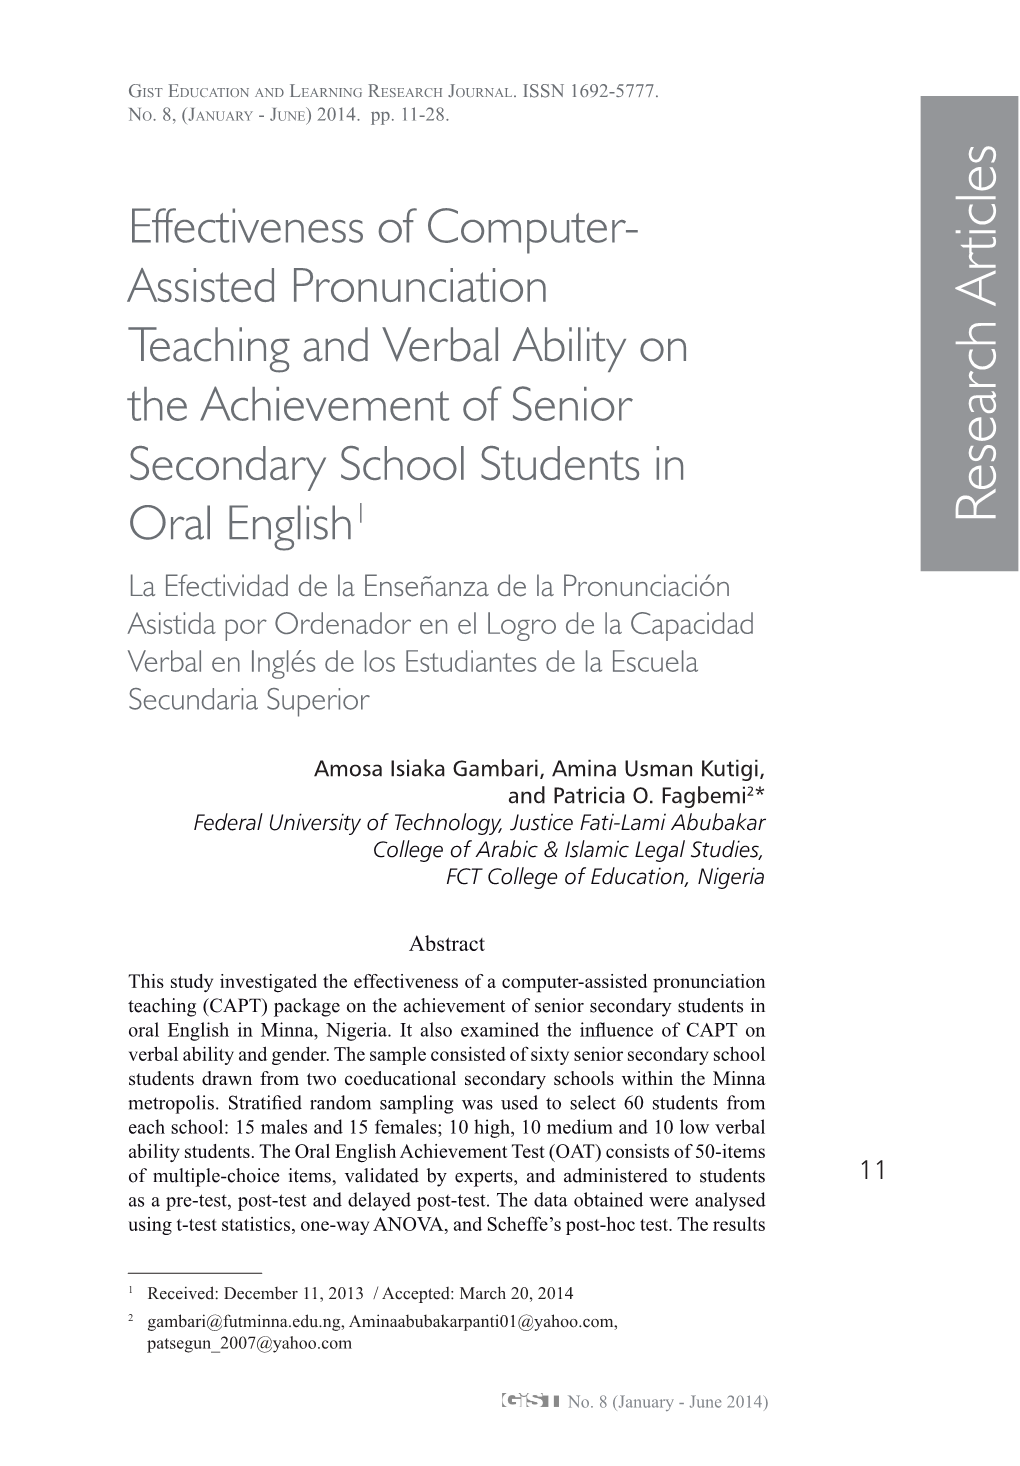 Effectiveness of Computer-Assisted Pronunciation Teaching And